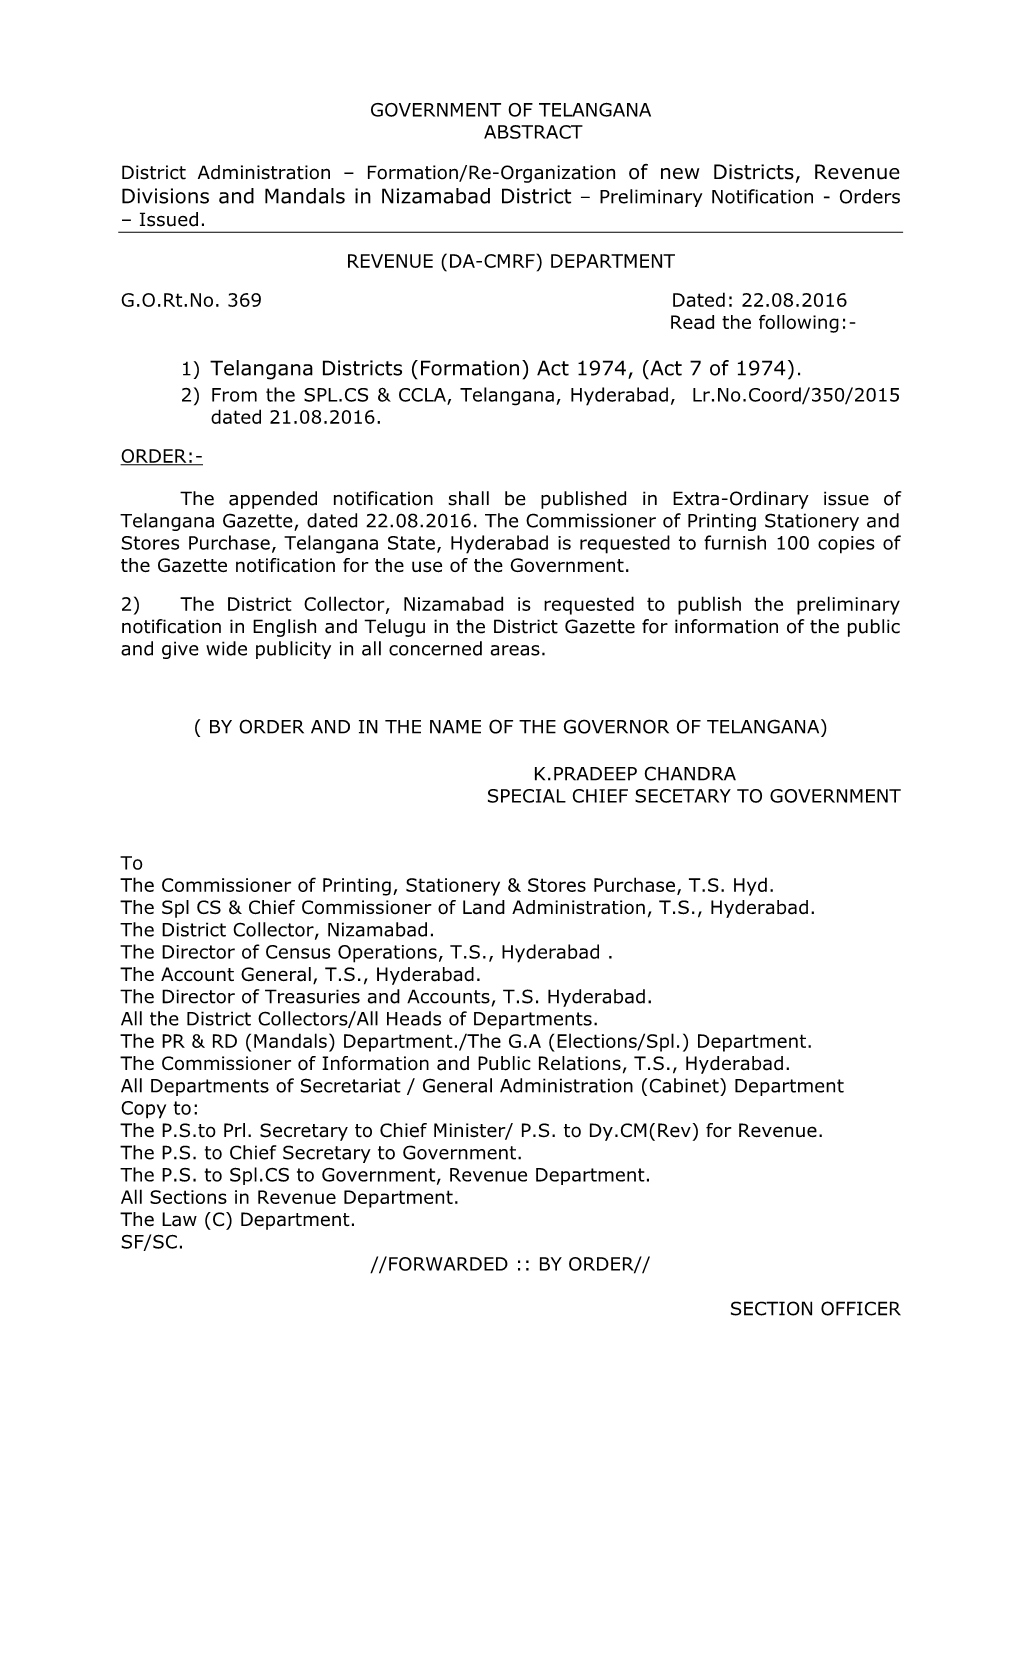 Of New Districts, Revenue Divisions and Mandals in Nizamabad District – Preliminary Notification - Orders – Issued